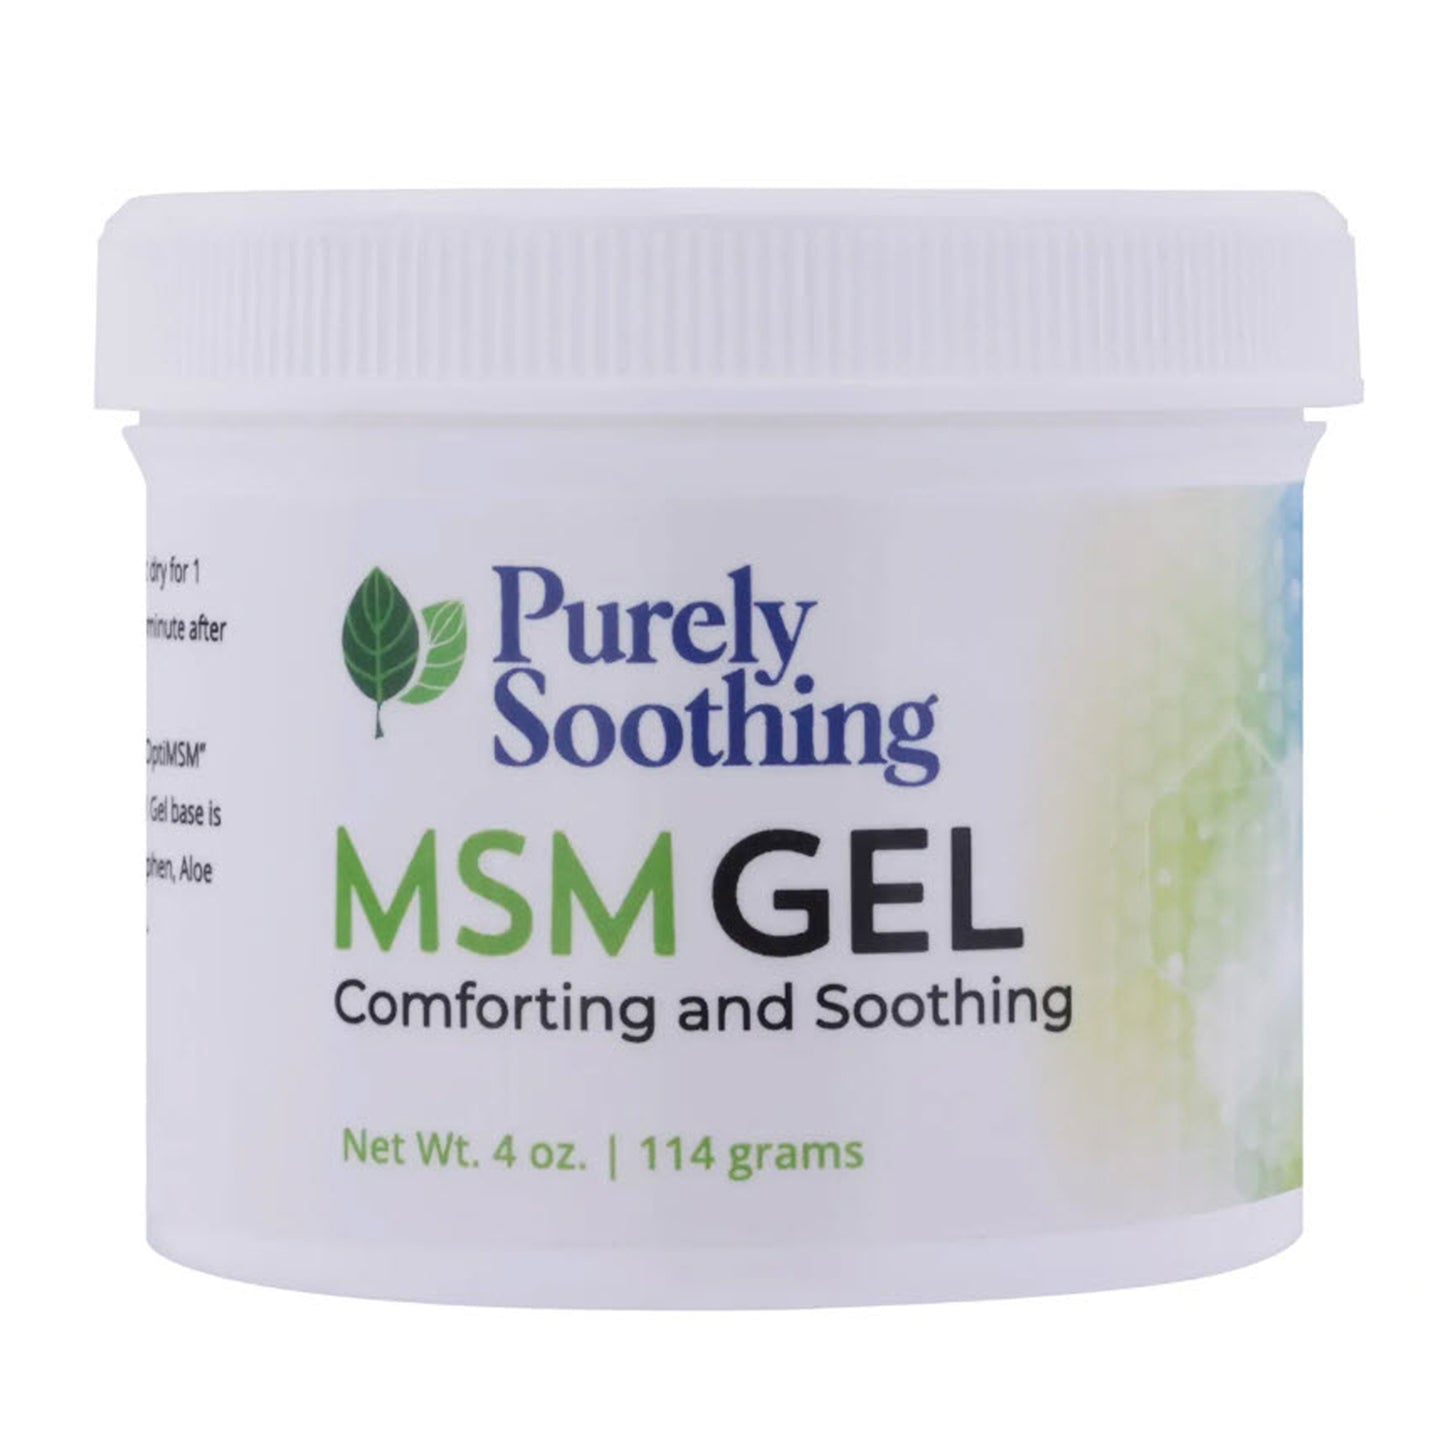 MSM GEL JAR 4 oz - By using “OptiMSM” as our only MSM, the purity of the product allows us to now manufacture products that are Self-Preserving/Preservative-Free!